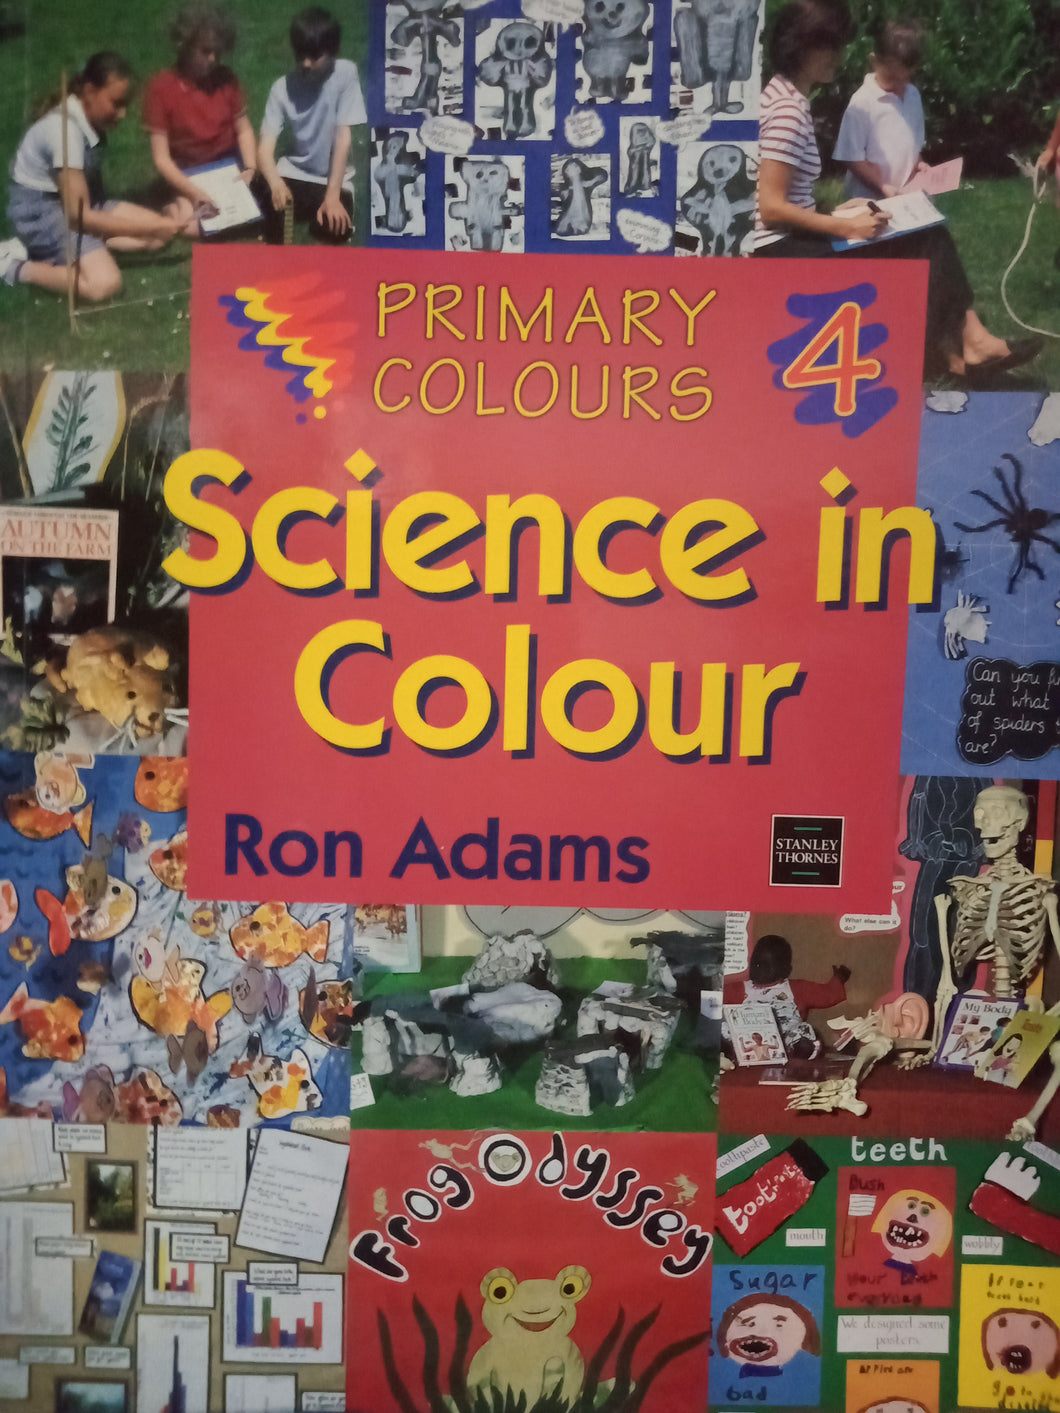 Primary Colours Science In Colour by Ron Adams